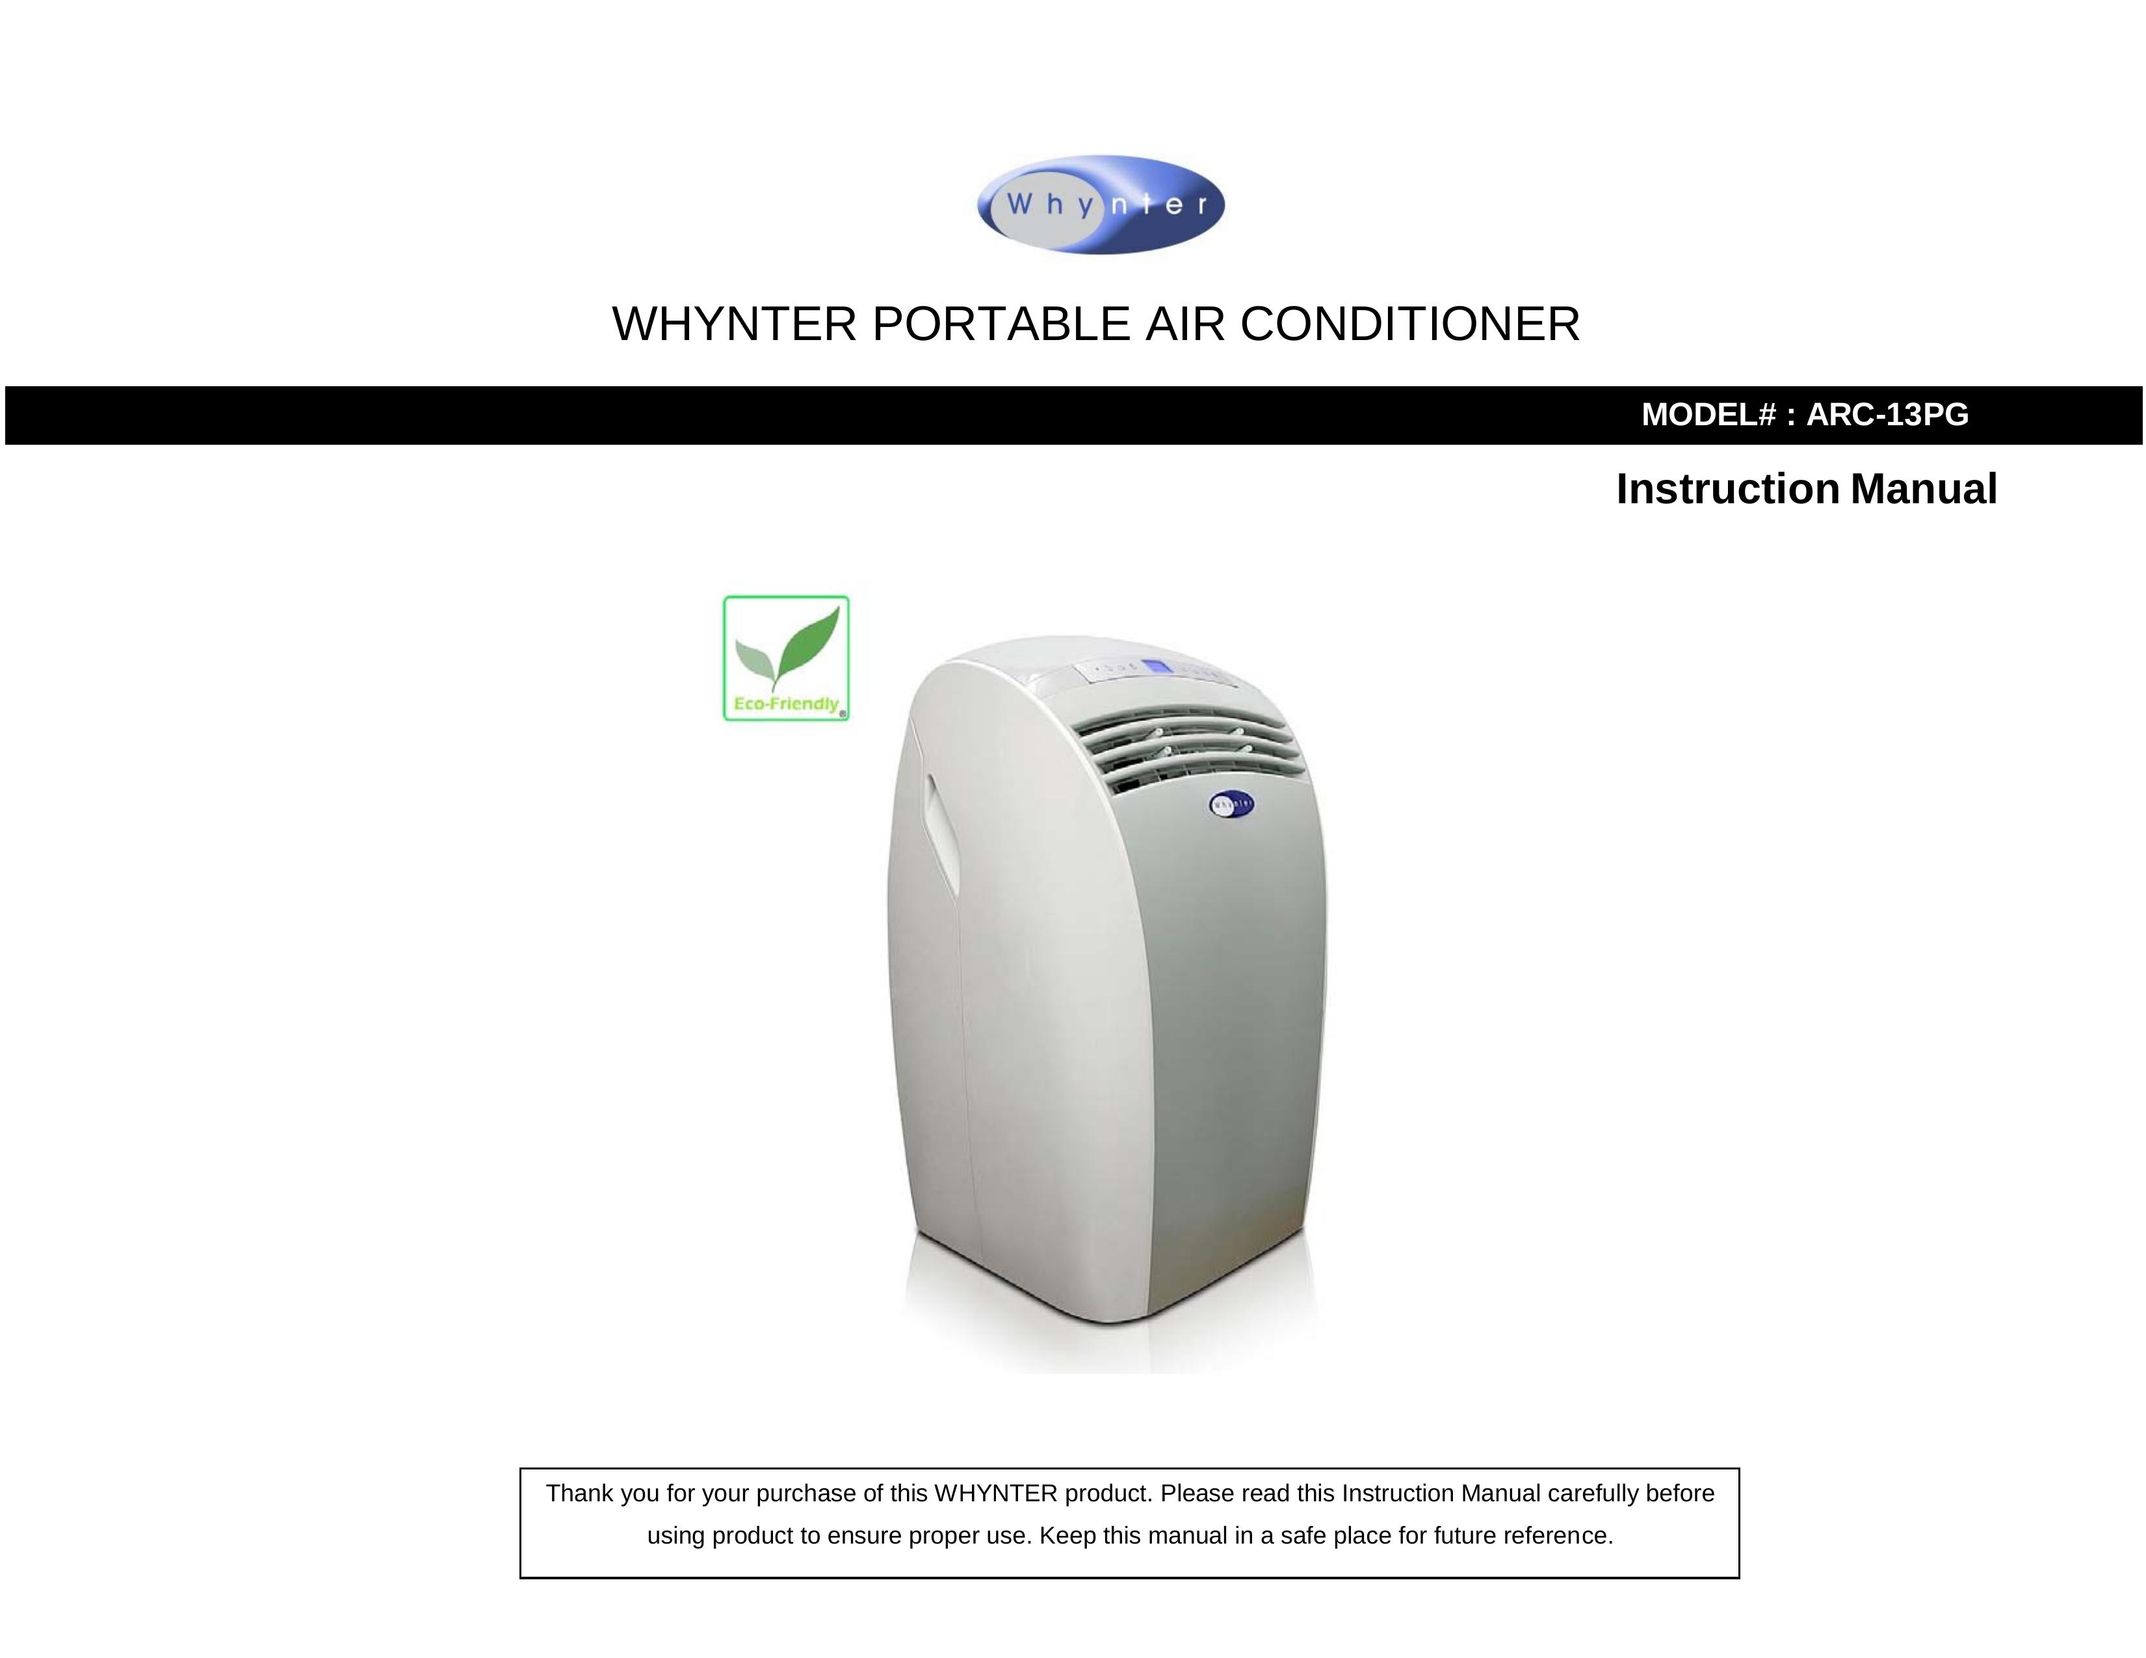 Whynter ARC-13PG Air Conditioner User Manual